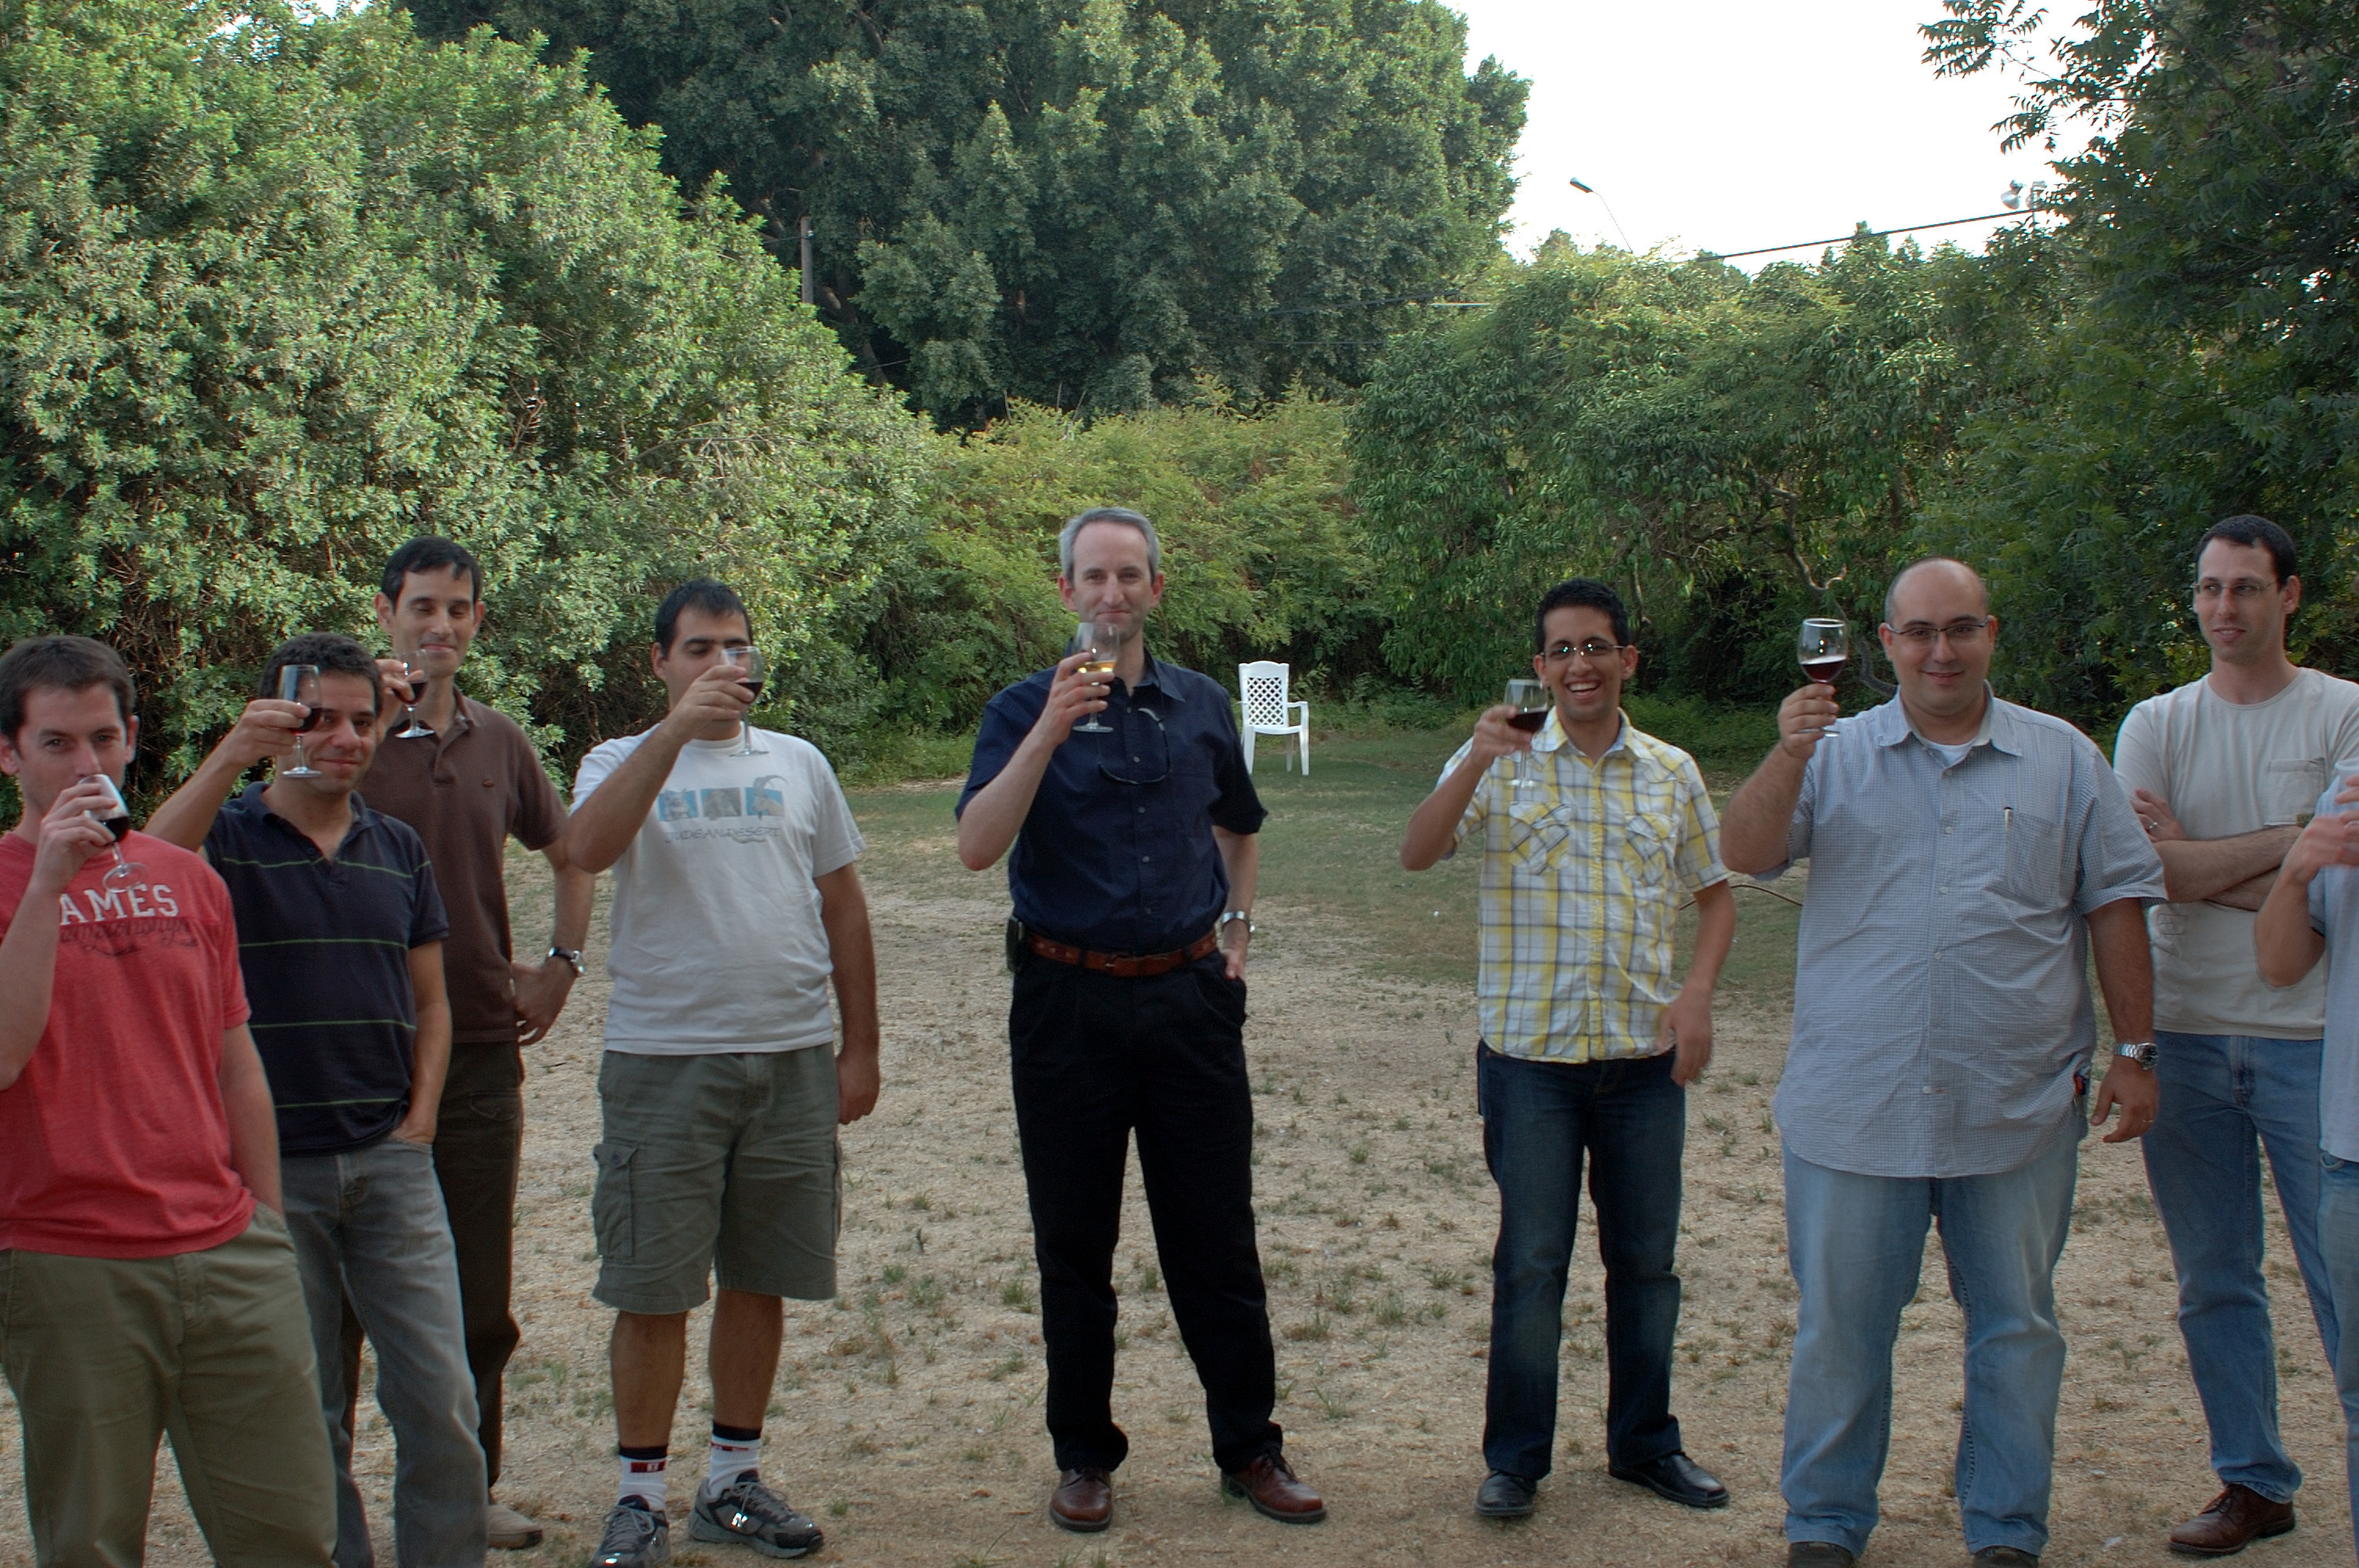 At a company barbecue in 2009 (third from the left).